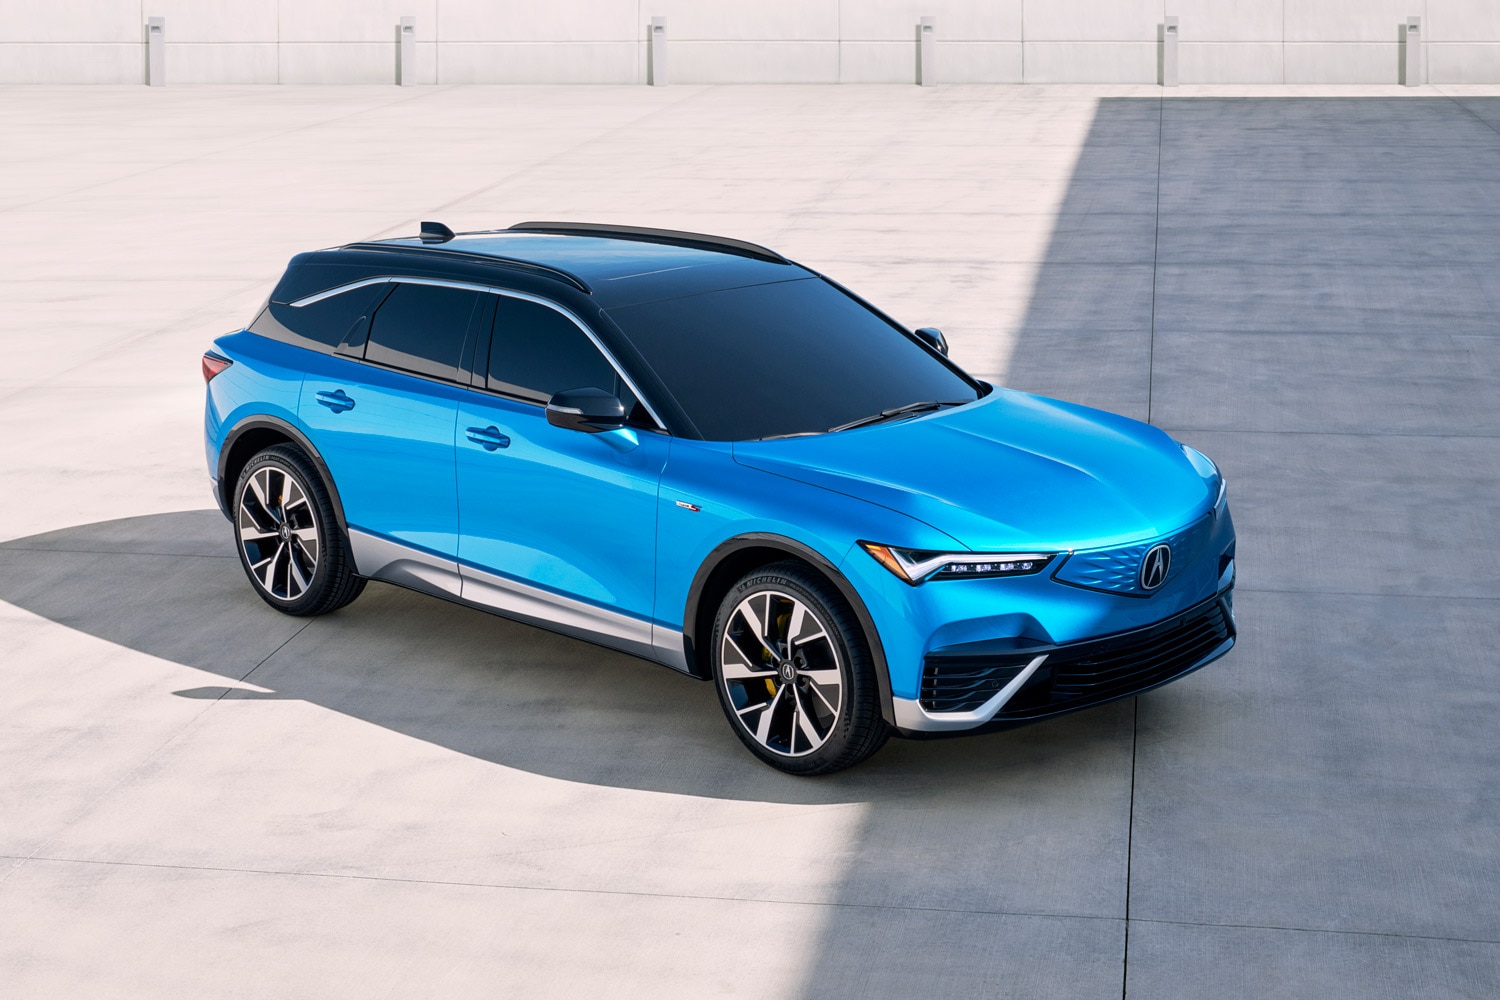 2024 Acura ZDX Type S in blue parked on open concrete area